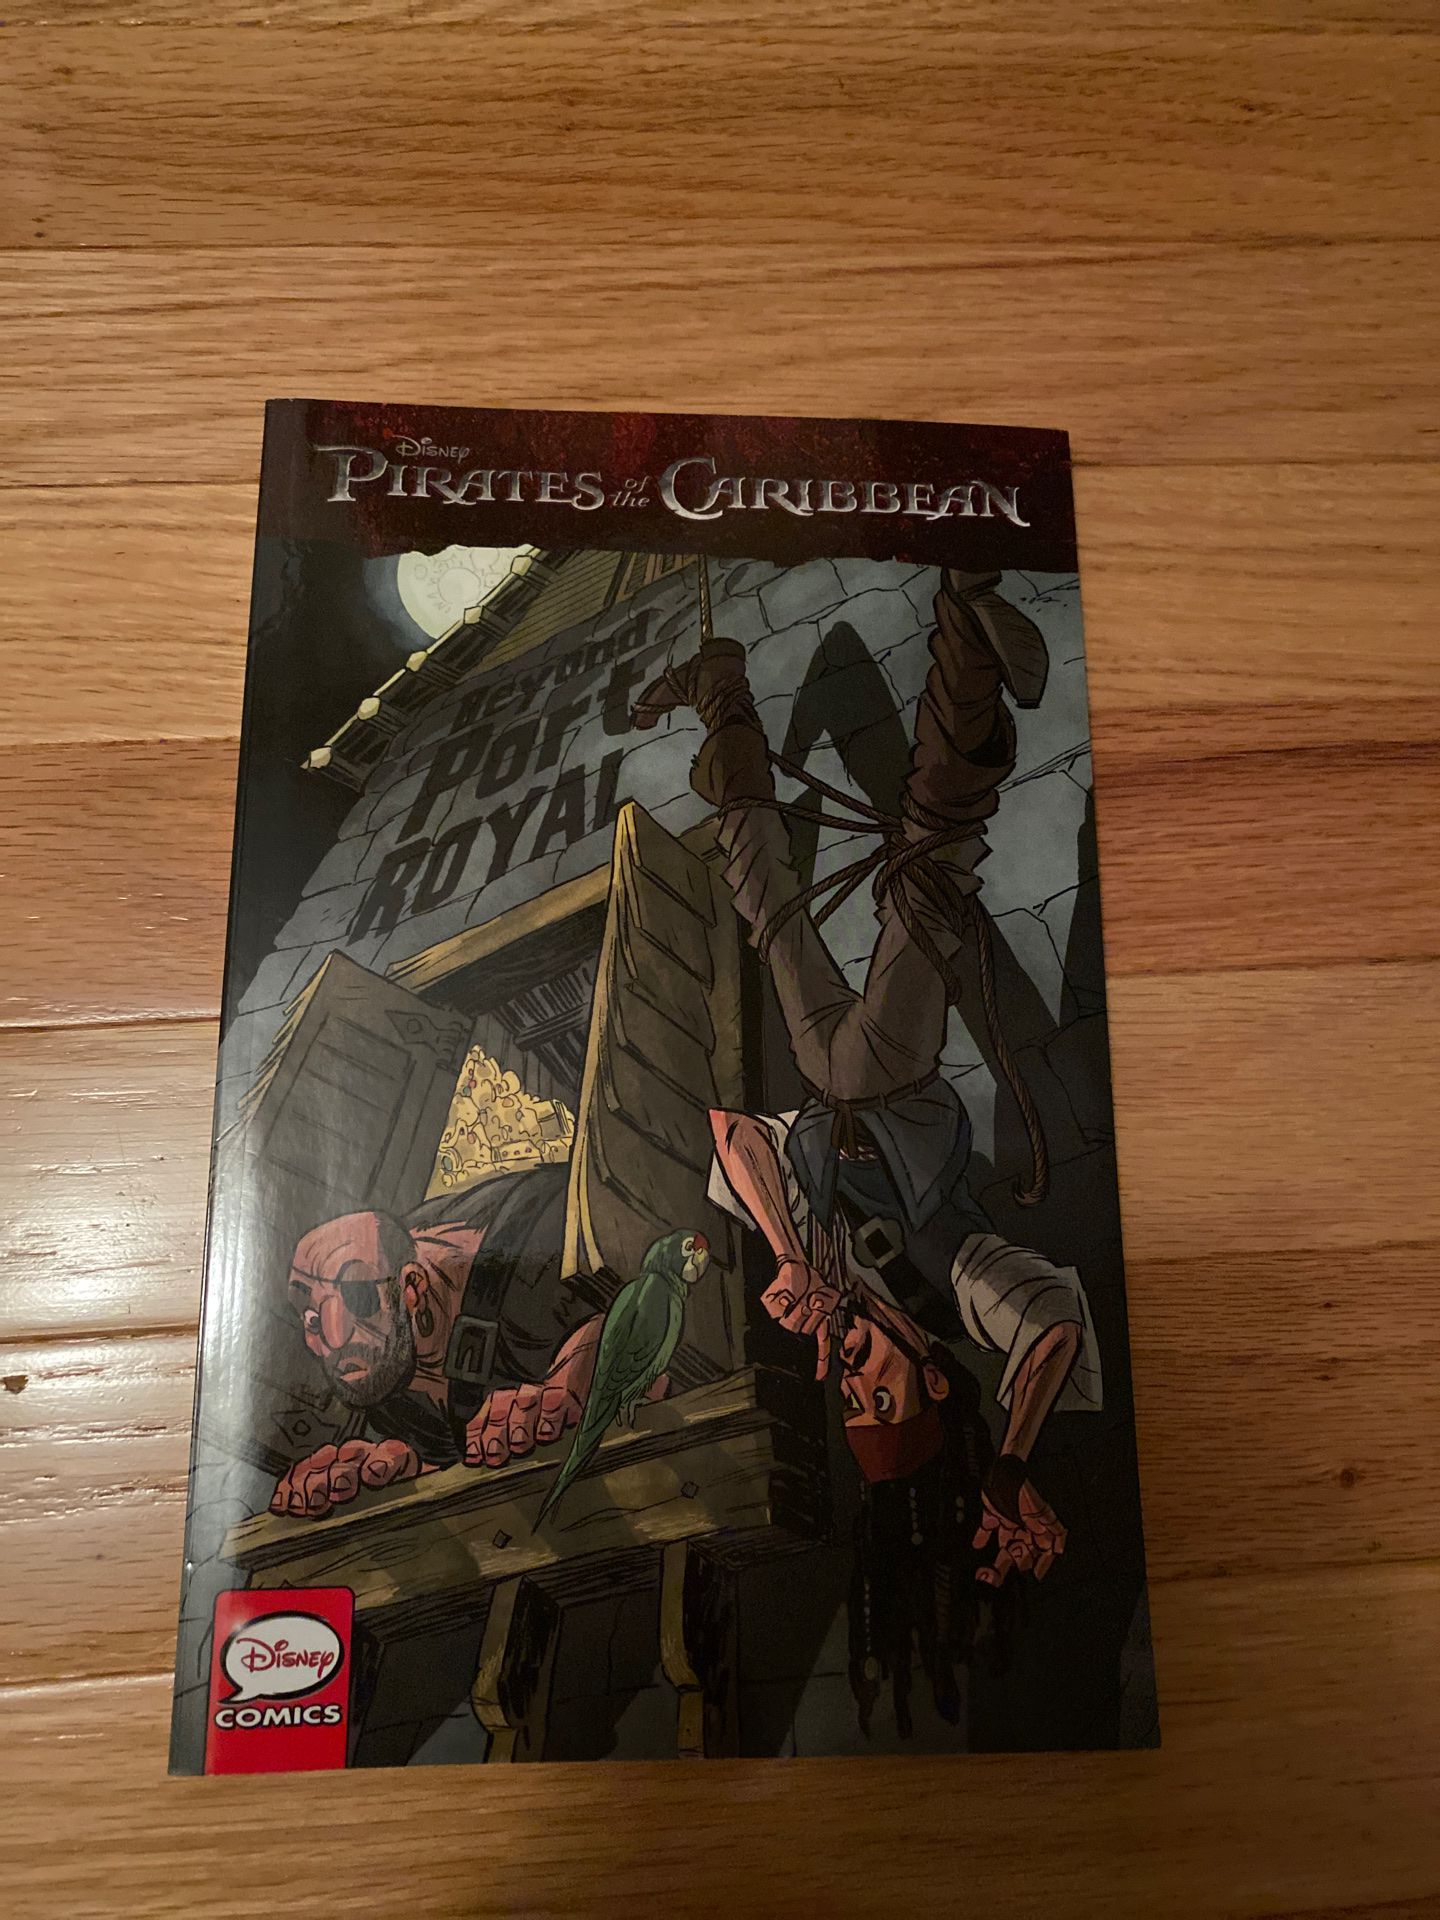 Pirates of the Caribbean - Graphic novel